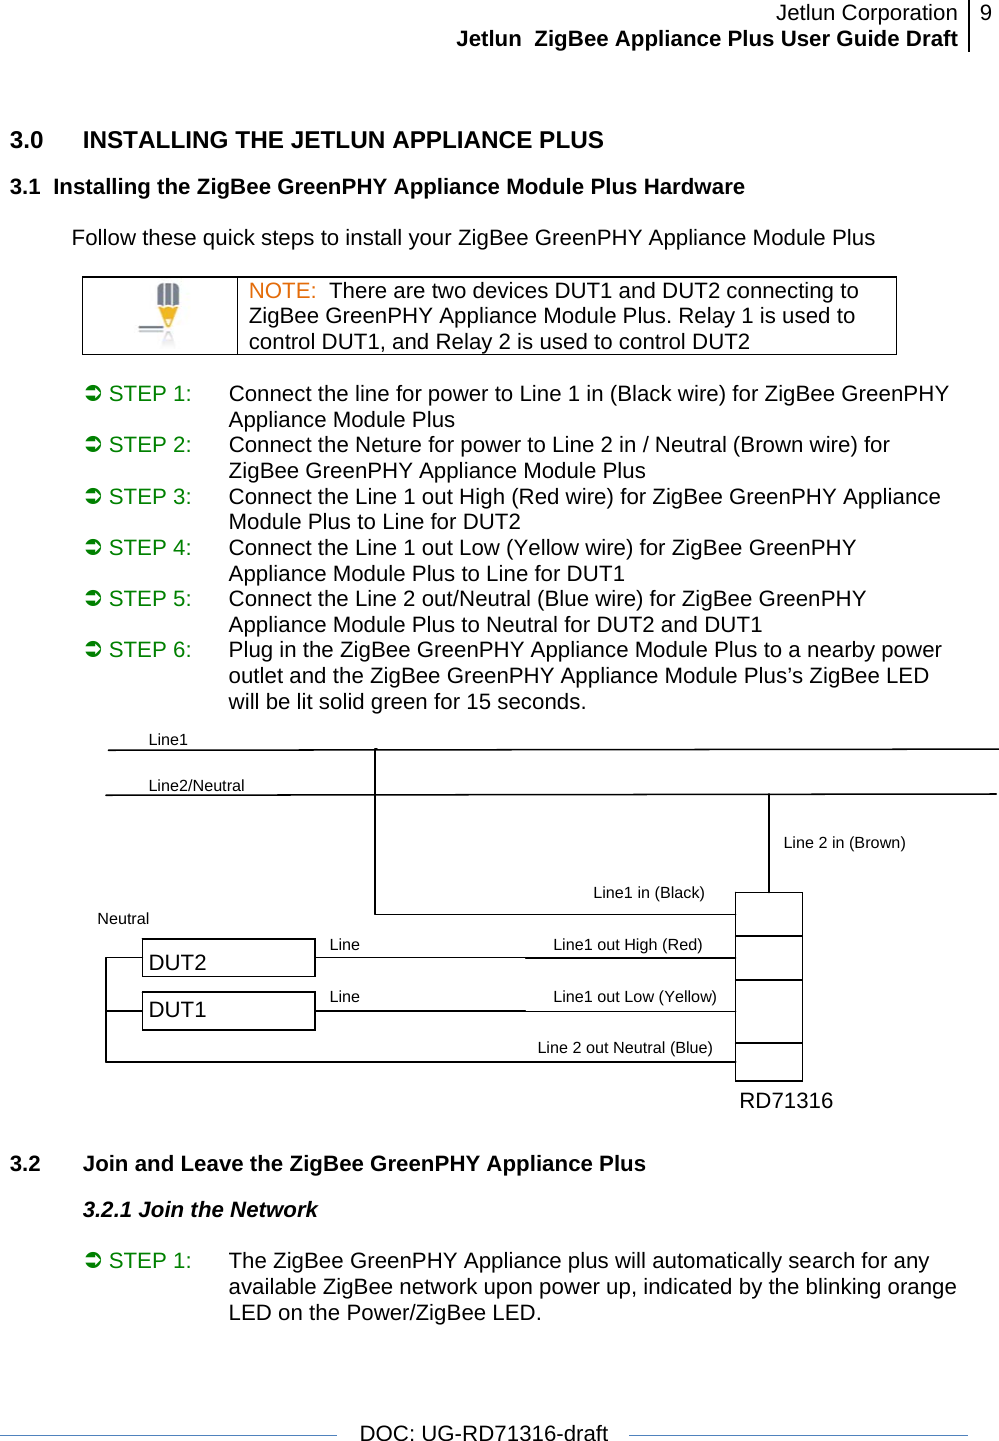 Jetlun CorporationJetlun  ZigBee Appliance Plus User Guide Draft 9   DOC: UG-RD71316-draft  3.0  INSTALLING THE JETLUN APPLIANCE PLUS  3.1  Installing the ZigBee GreenPHY Appliance Module Plus Hardware            Follow these quick steps to install your ZigBee GreenPHY Appliance Module Plus   NOTE:  There are two devices DUT1 and DUT2 connecting to ZigBee GreenPHY Appliance Module Plus. Relay 1 is used to control DUT1, and Relay 2 is used to control DUT2  Â STEP 1:  Connect the line for power to Line 1 in (Black wire) for ZigBee GreenPHY Appliance Module Plus   Â STEP 2:  Connect the Neture for power to Line 2 in / Neutral (Brown wire) for ZigBee GreenPHY Appliance Module Plus Â STEP 3:  Connect the Line 1 out High (Red wire) for ZigBee GreenPHY Appliance Module Plus to Line for DUT2 Â STEP 4:  Connect the Line 1 out Low (Yellow wire) for ZigBee GreenPHY Appliance Module Plus to Line for DUT1 Â STEP 5:  Connect the Line 2 out/Neutral (Blue wire) for ZigBee GreenPHY Appliance Module Plus to Neutral for DUT2 and DUT1 Â STEP 6:  Plug in the ZigBee GreenPHY Appliance Module Plus to a nearby power outlet and the ZigBee GreenPHY Appliance Module Plus’s ZigBee LED will be lit solid green for 15 seconds.  3.2   Join and Leave the ZigBee GreenPHY Appliance Plus 3.2.1 Join the Network  Â STEP 1:  The ZigBee GreenPHY Appliance plus will automatically search for any available ZigBee network upon power up, indicated by the blinking orange LED on the Power/ZigBee LED. Line1 Line2/Neutral Line1 in (Black) RD71316 Line 2 in (Brown) Line1 out High (Red) Line1 out Low (Yellow) Line 2 out Neutral (Blue) Line Line Neutral DUT2 DUT1 